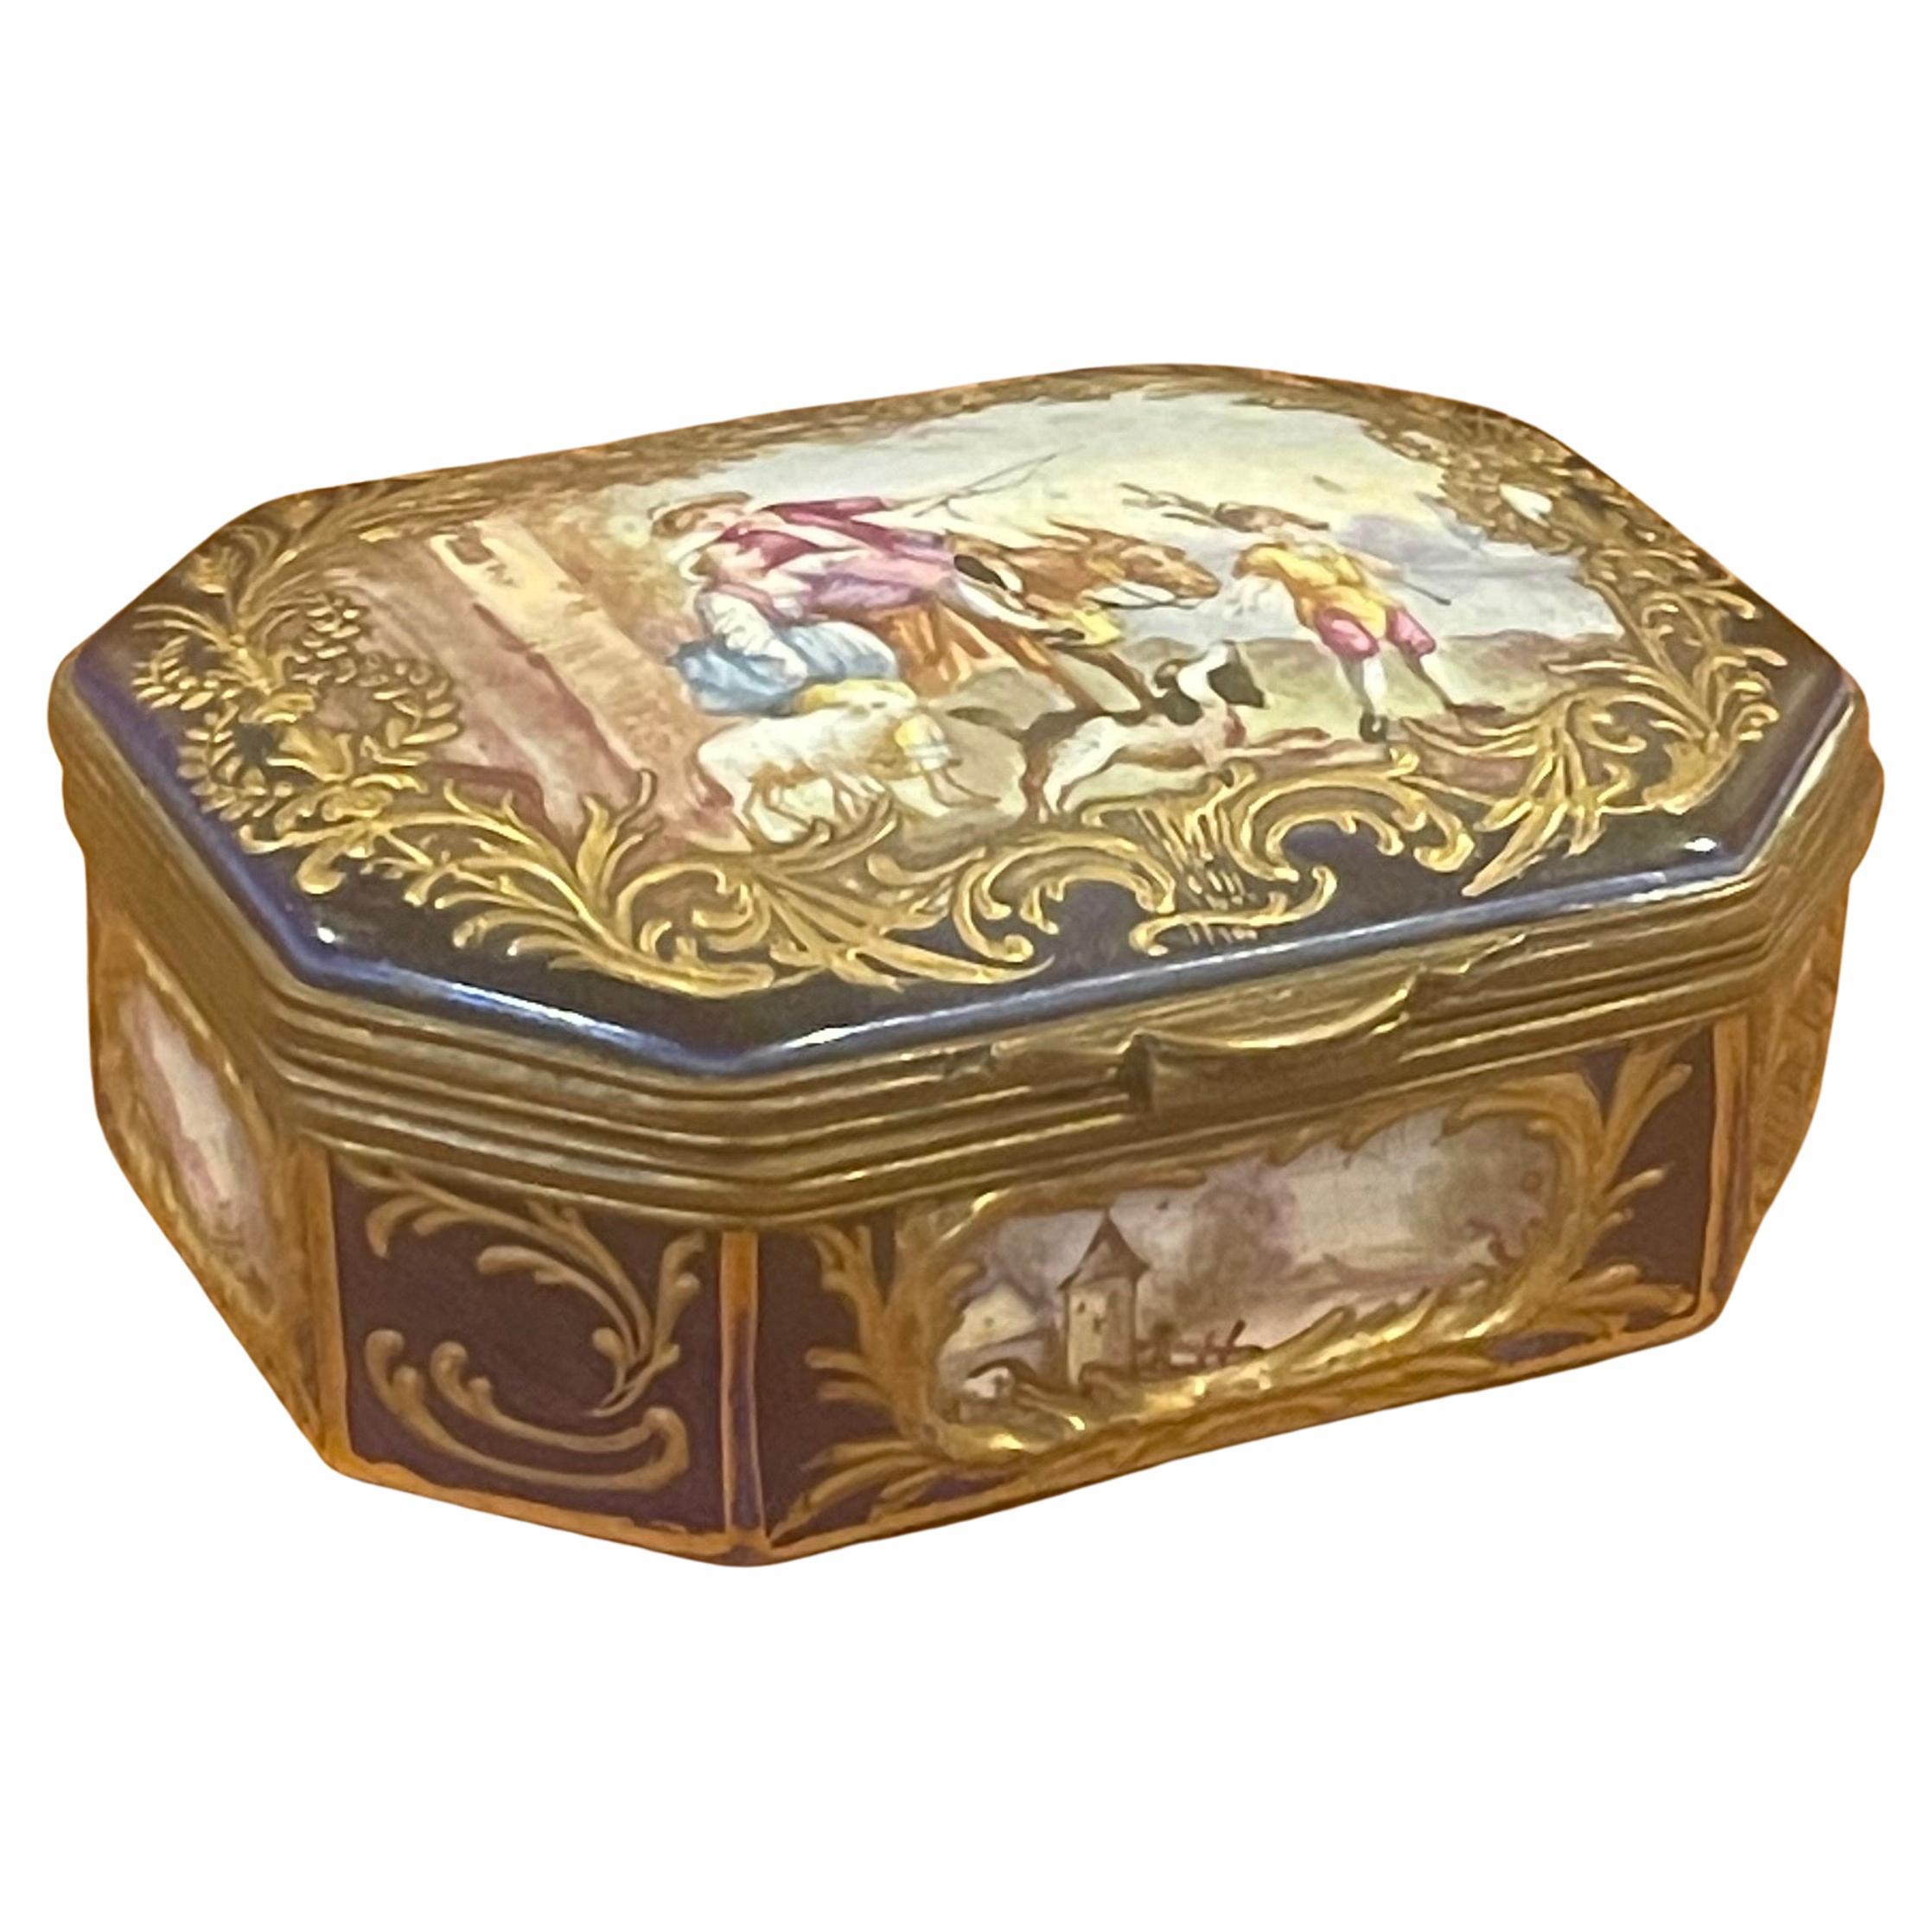 An exquisite 18th century Victorian porcelain and ormulu hand painted lidded box by Sevres, circa late 1800's. The box has a wonderful design and is in very good antique condition; it measures 4.5